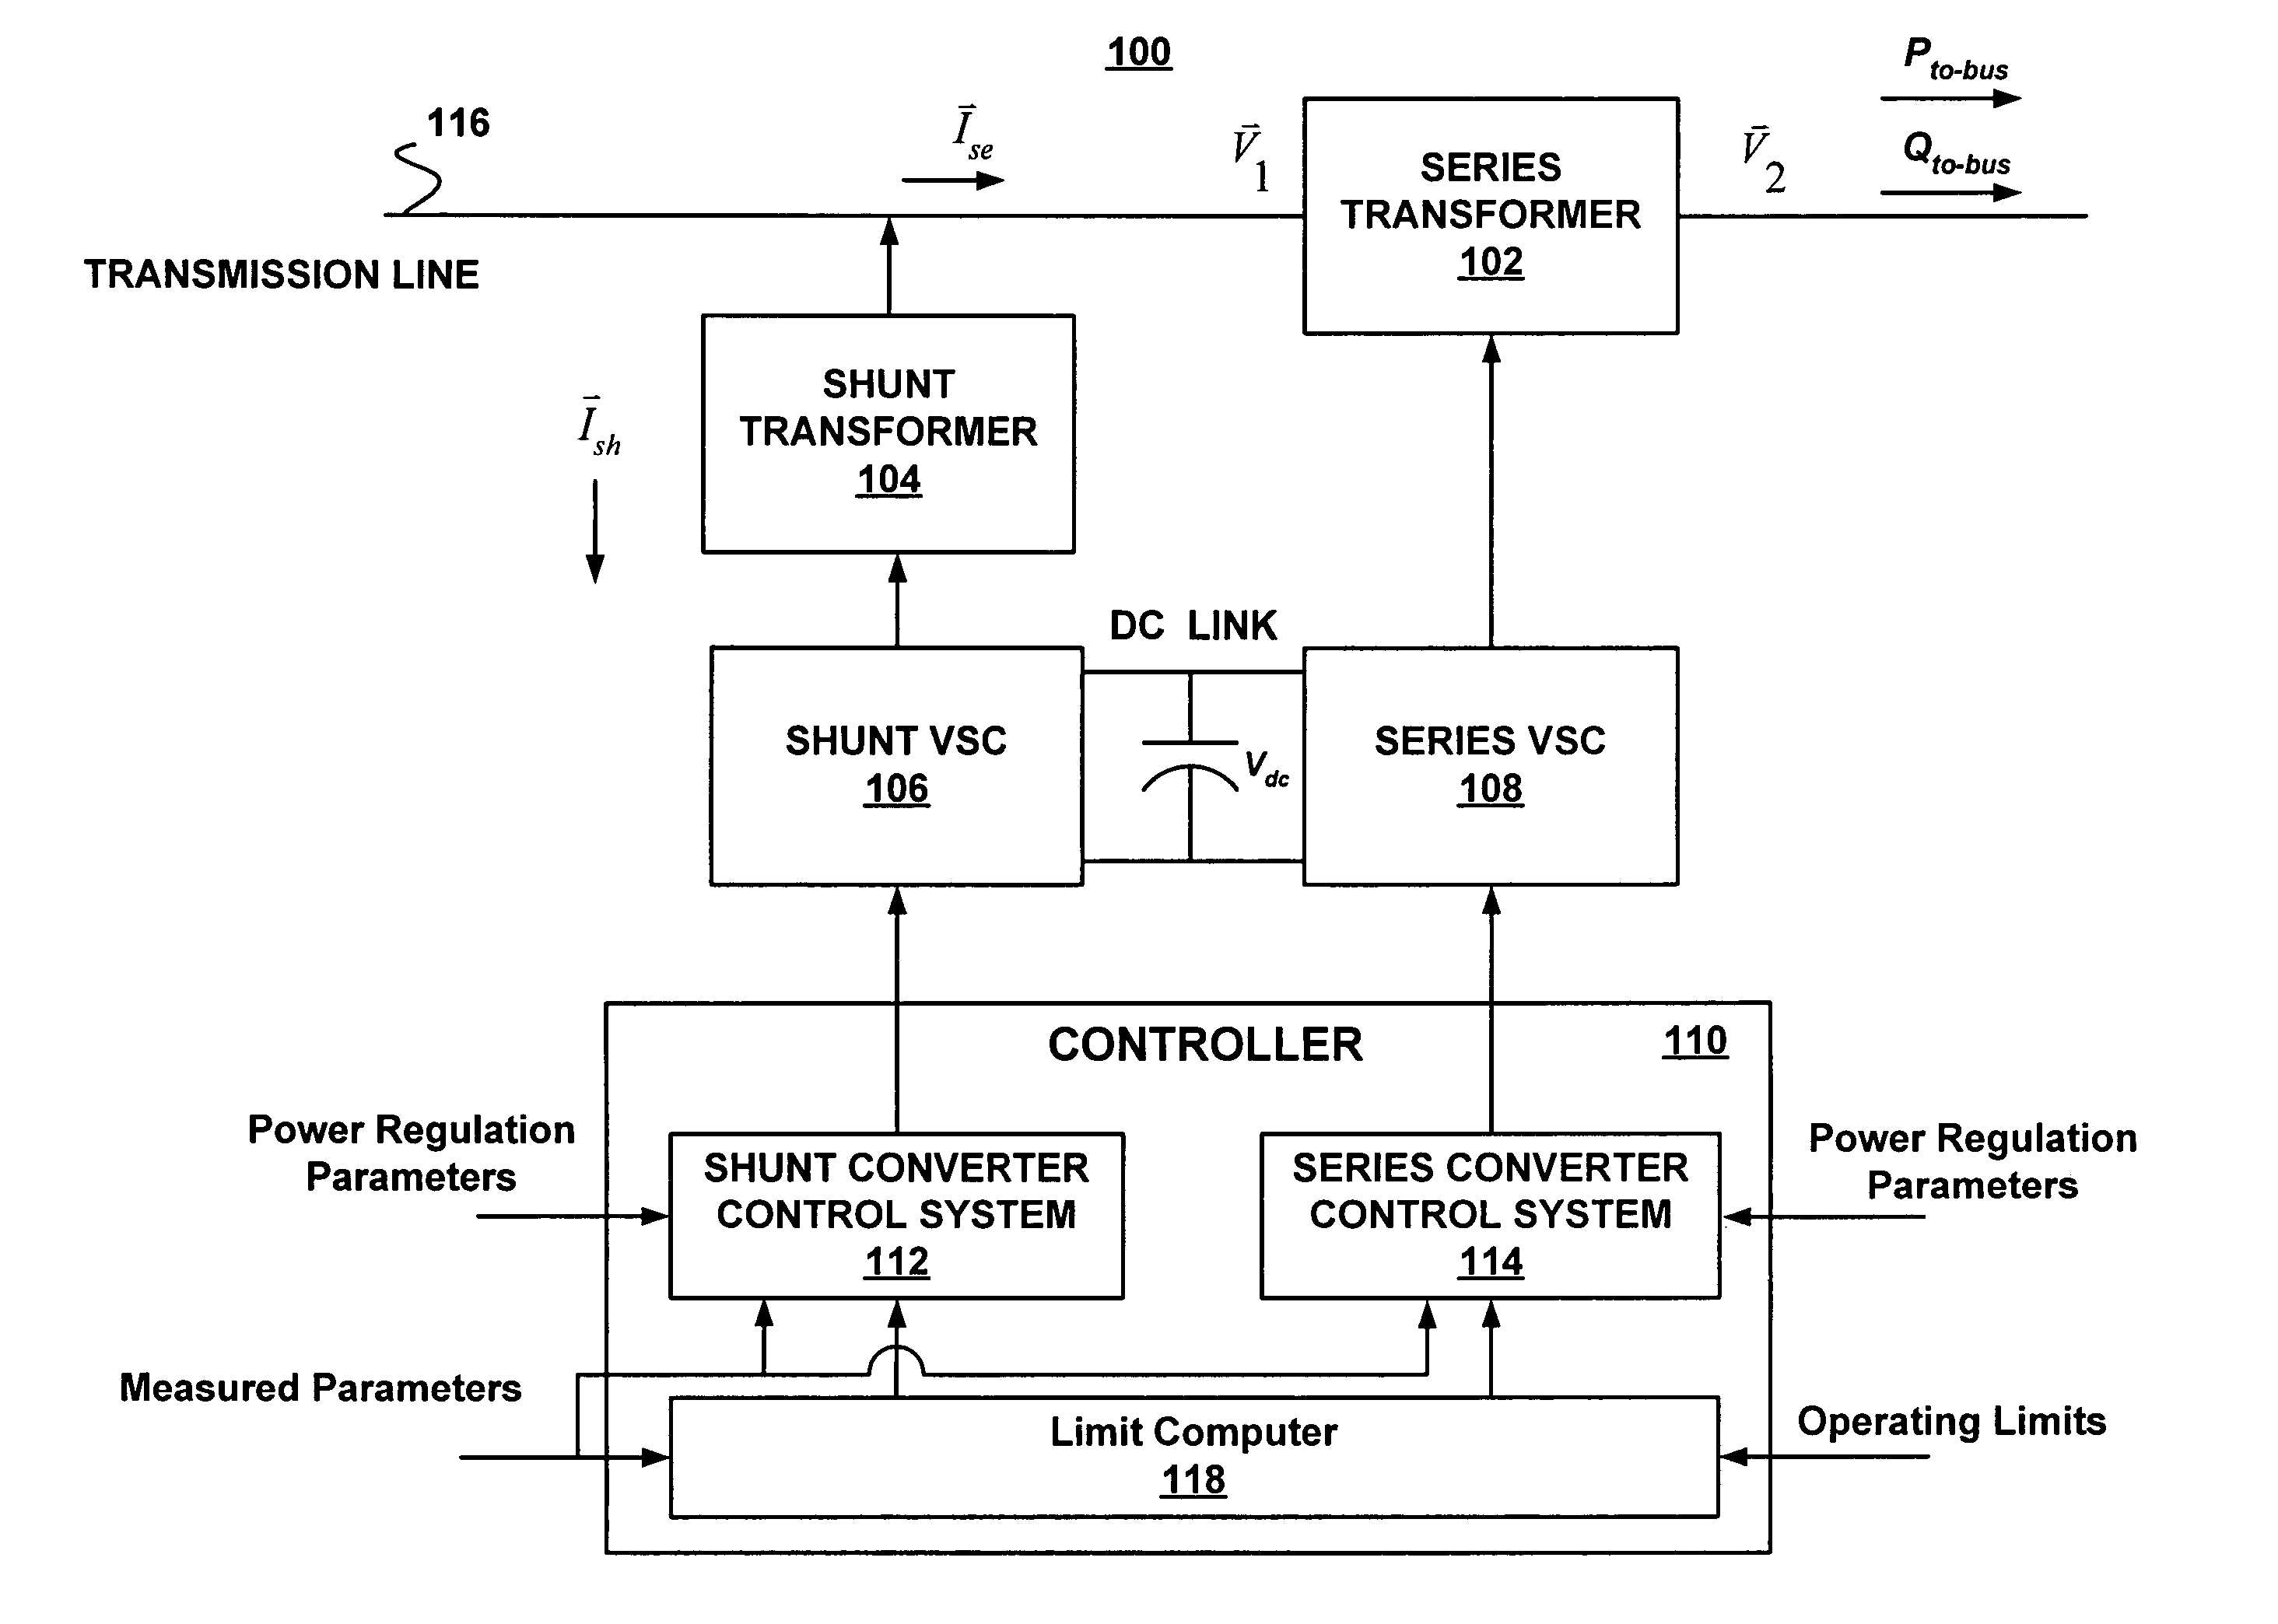 Power flow controller responsive to power circulation demand for optimizing power transfer